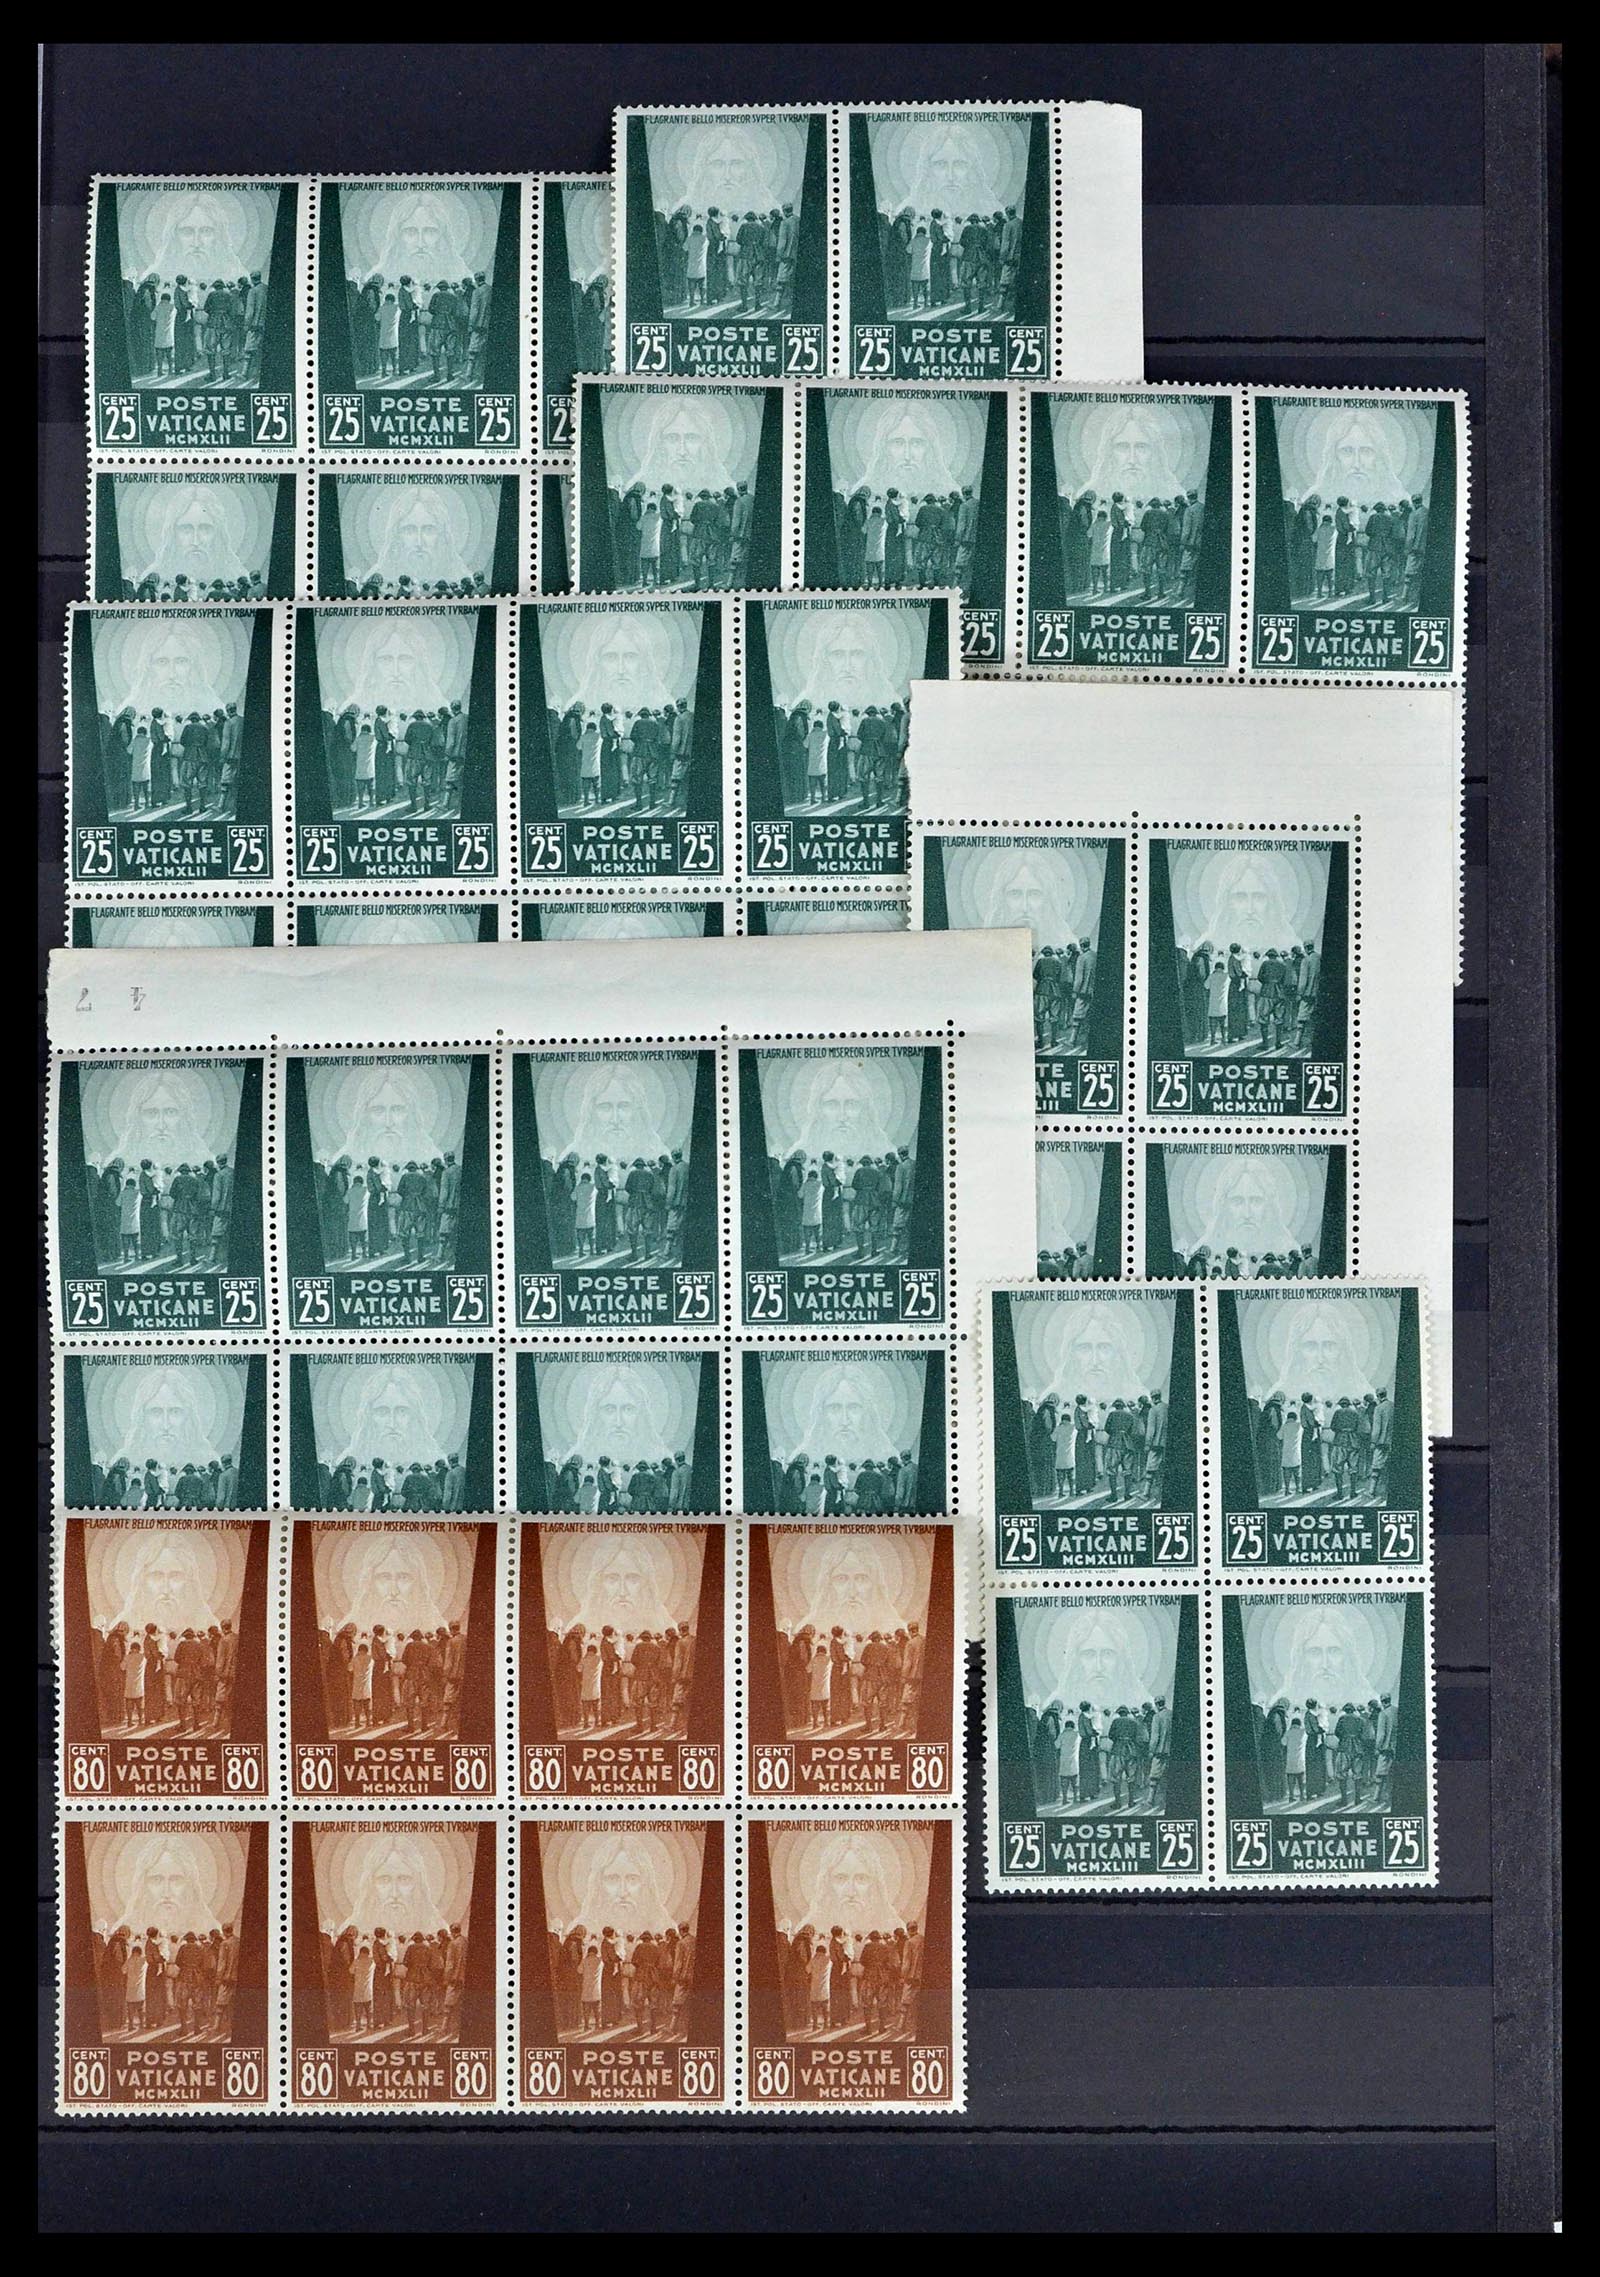 39236 0027 - Stamp collection 39236 European countries 40s-60s.